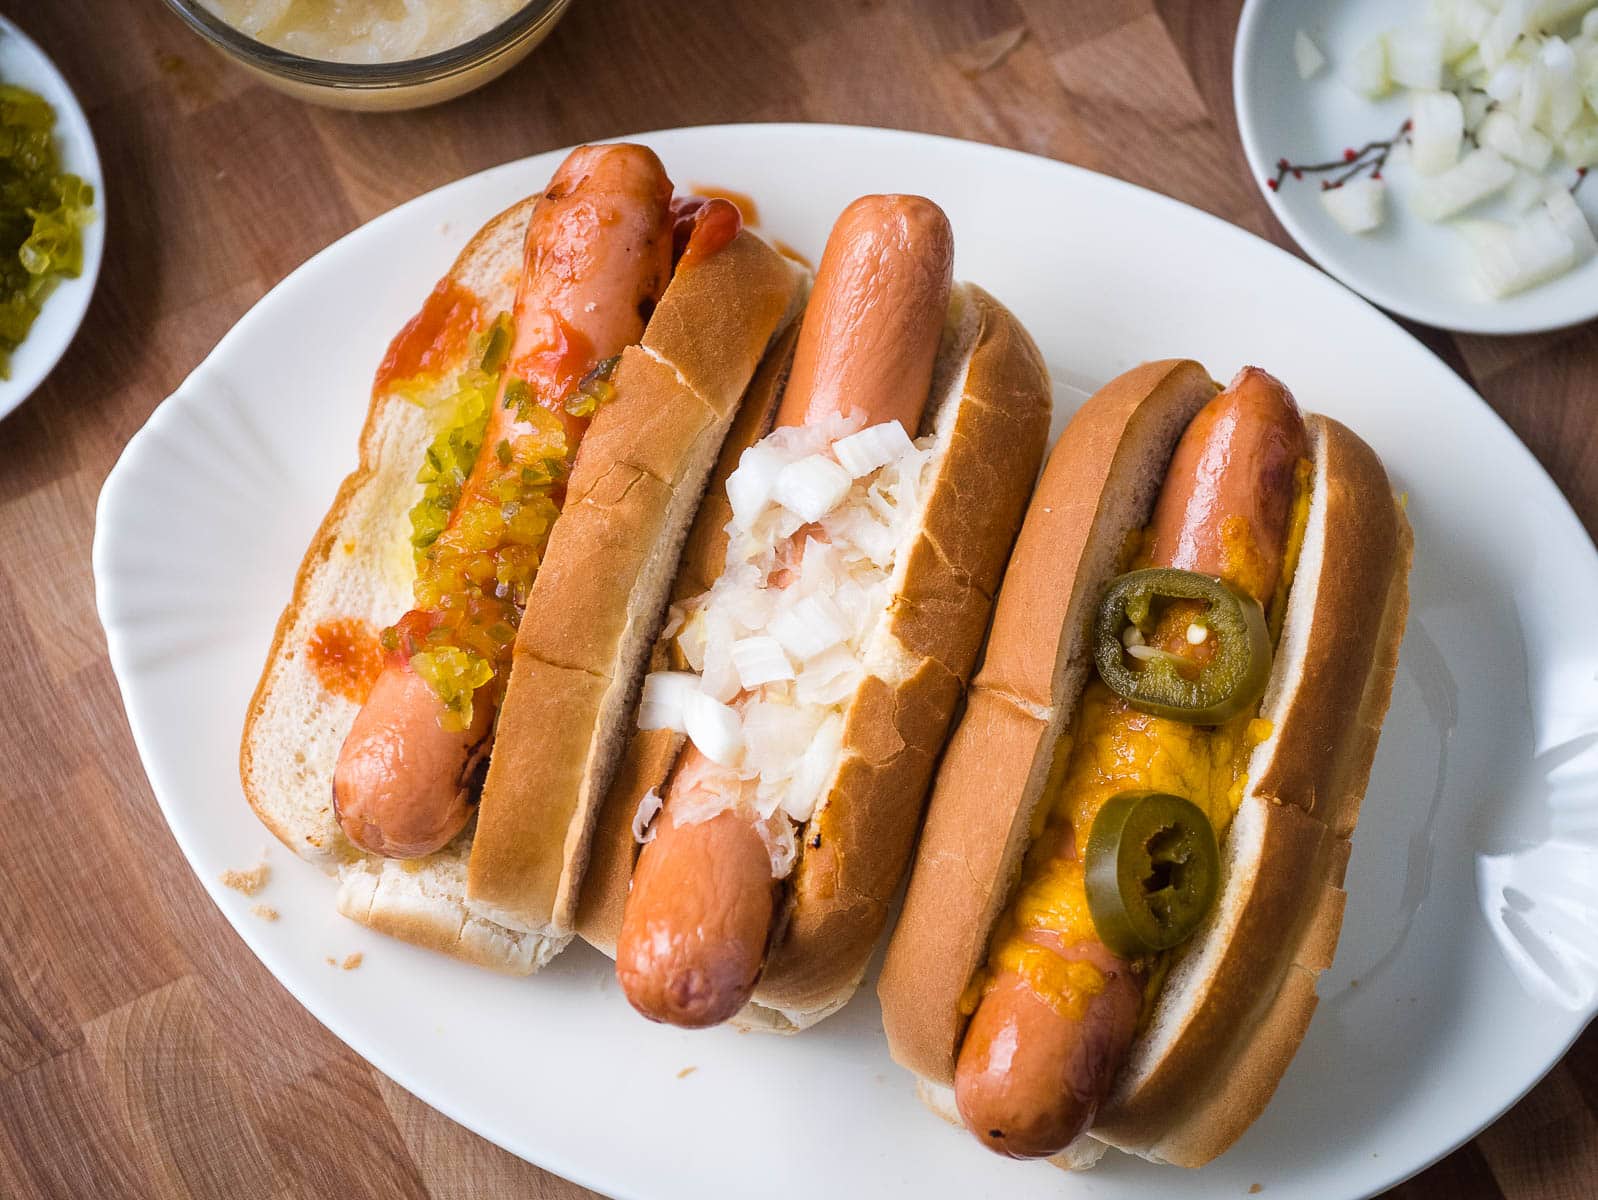 Three air fryer hot dogs in buns with toppings.